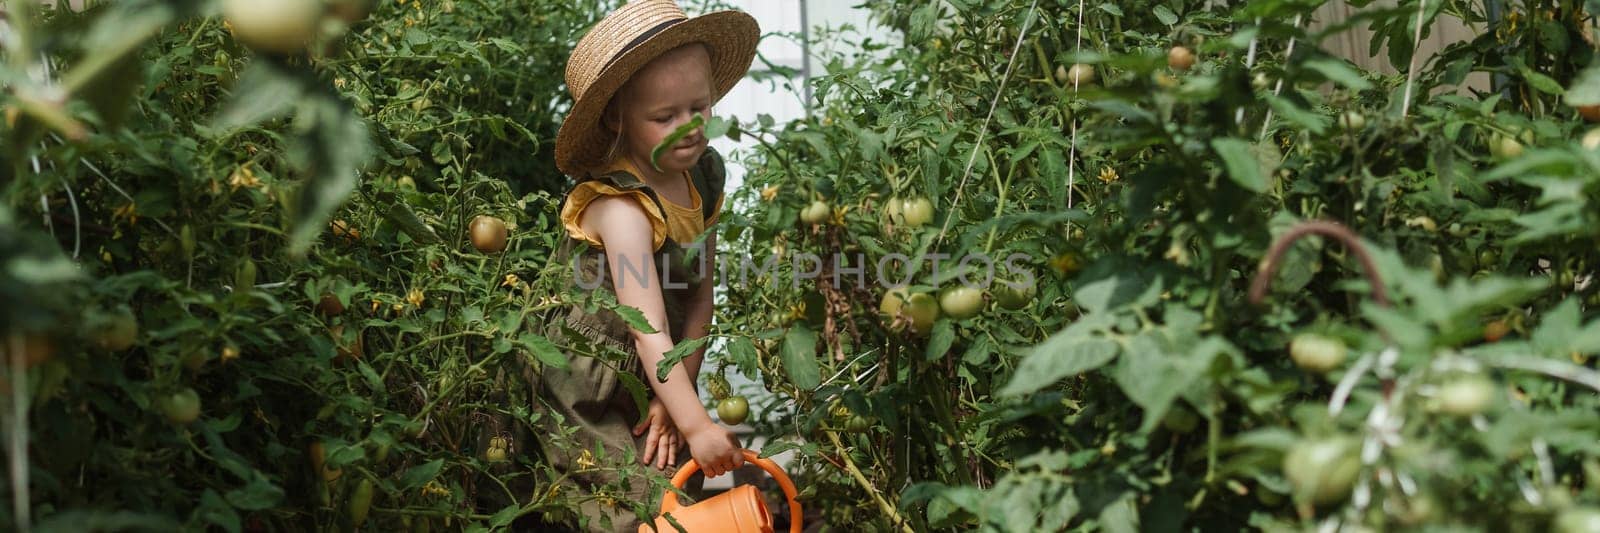 A little girl in a straw hat is picking tomatoes in a greenhouse. Harvest concept